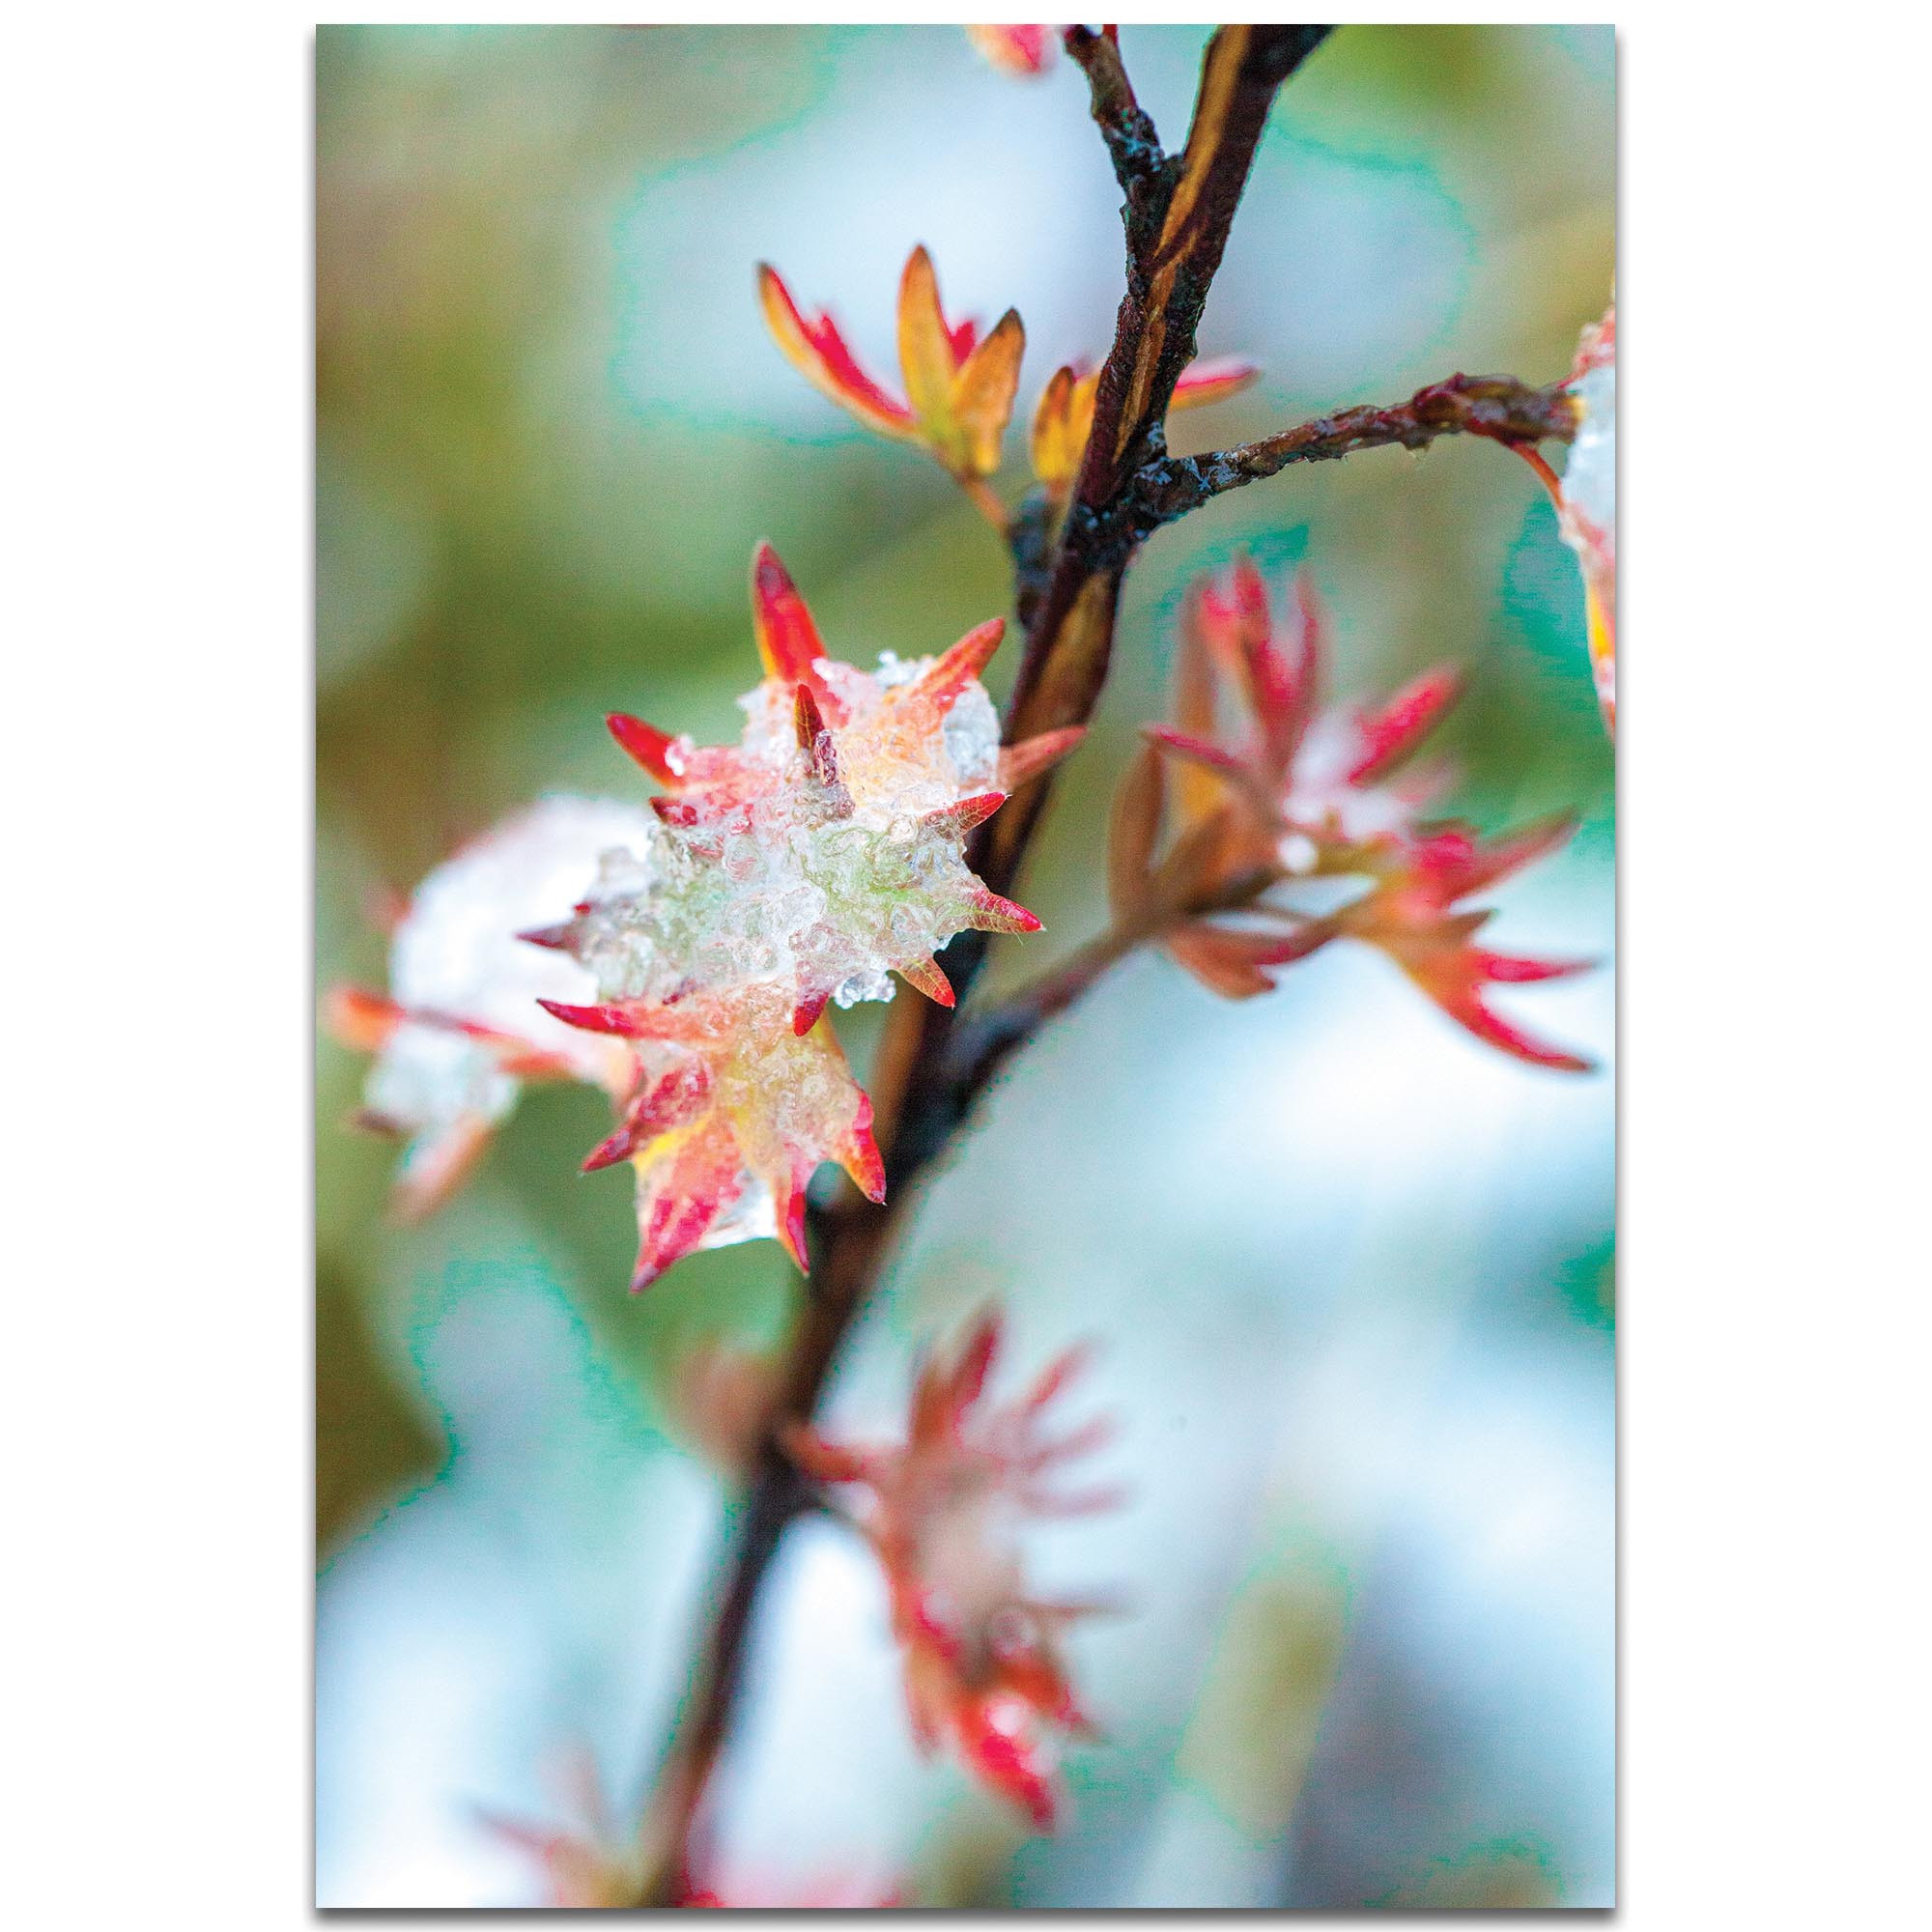 Nature Photography 'Icy Autumn' - Winter Blossom Art on Metal or Plexiglass